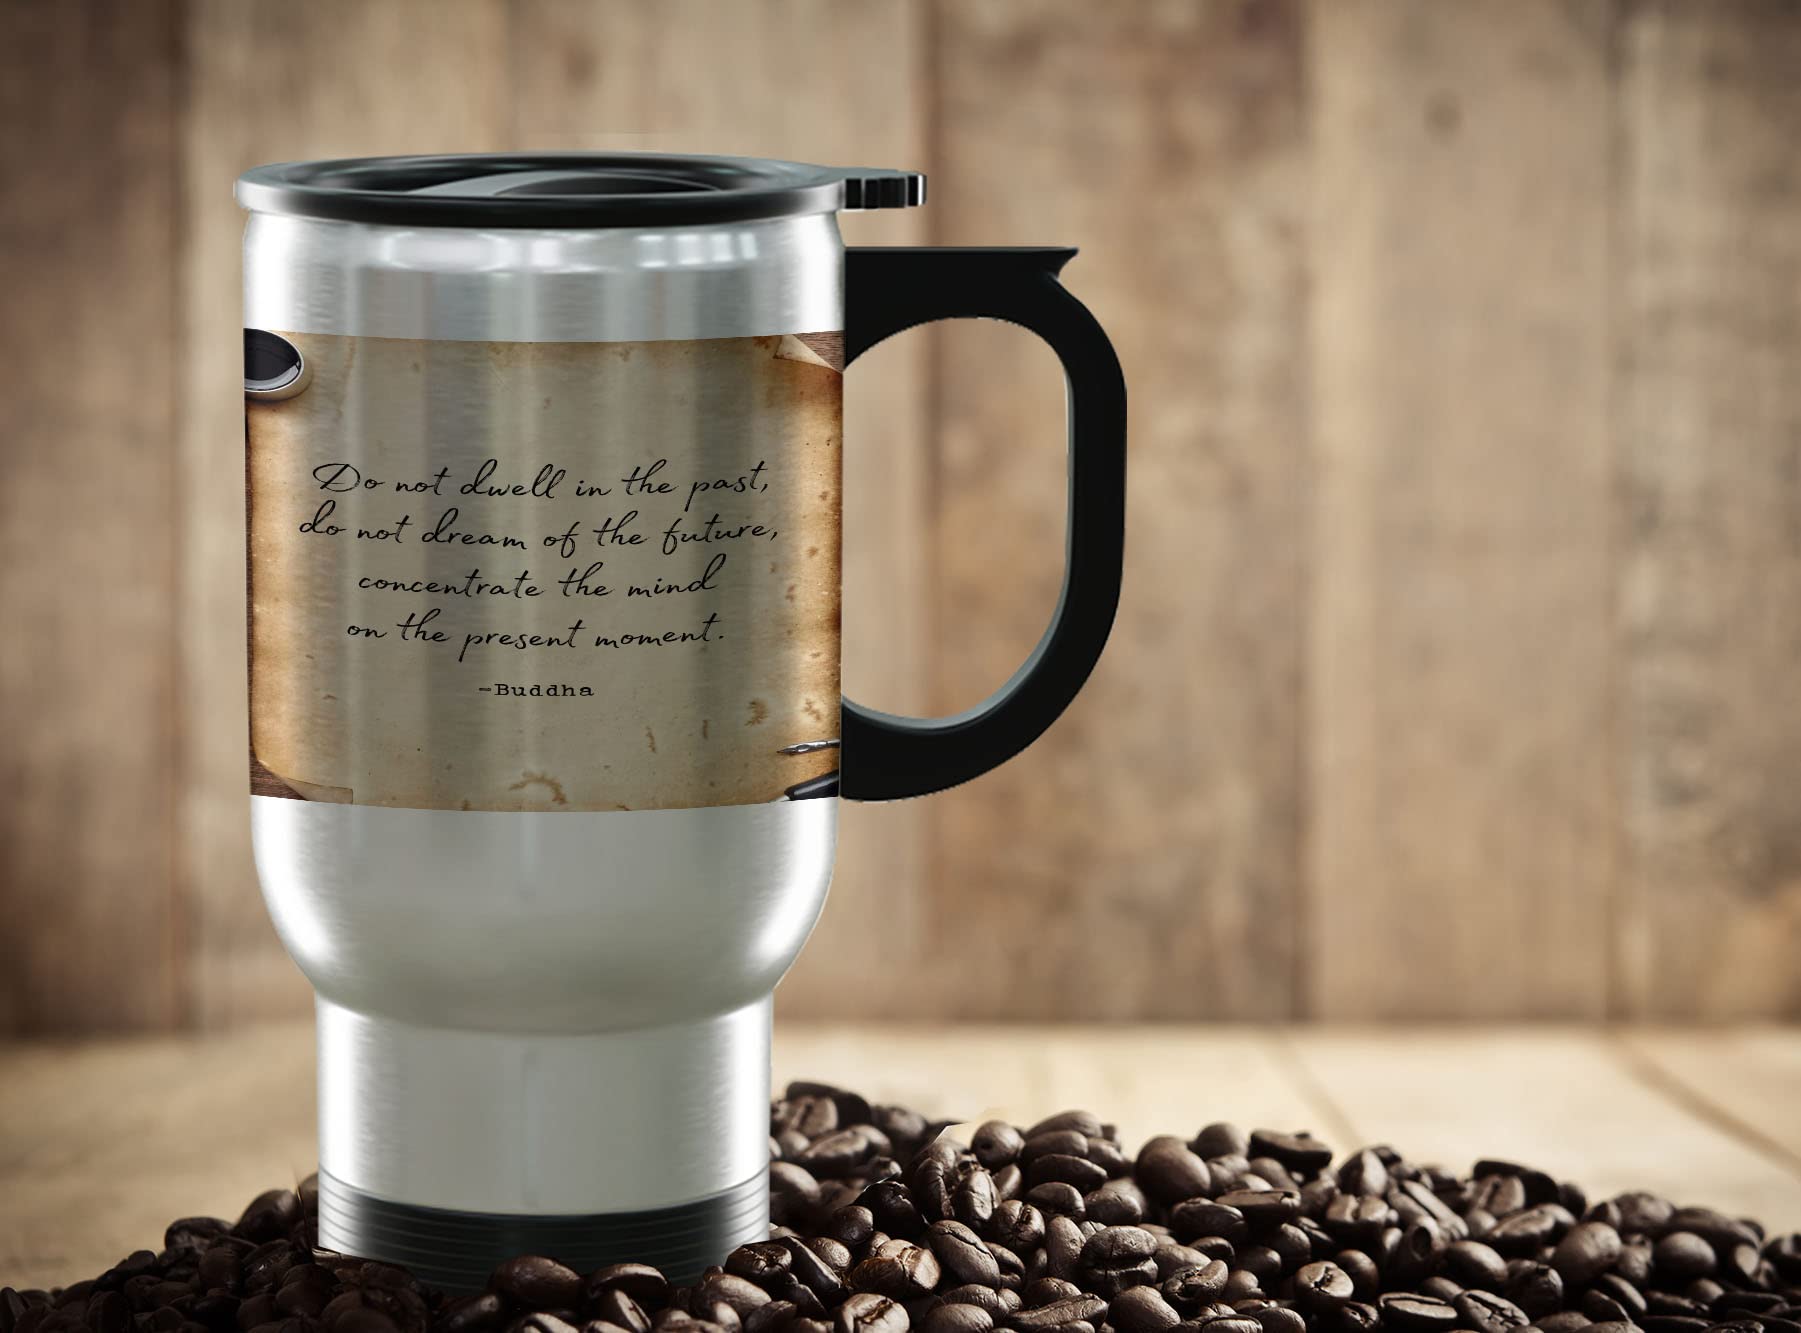 TJ Originals Buddha Quotes Do Not Dwell In The Past Gifts for Her - Vintage Manuscript Graduation Drinkware- 14oz Travel Mug Steel - Best Divorce Gifts Office BFF Gifts for Women Friends